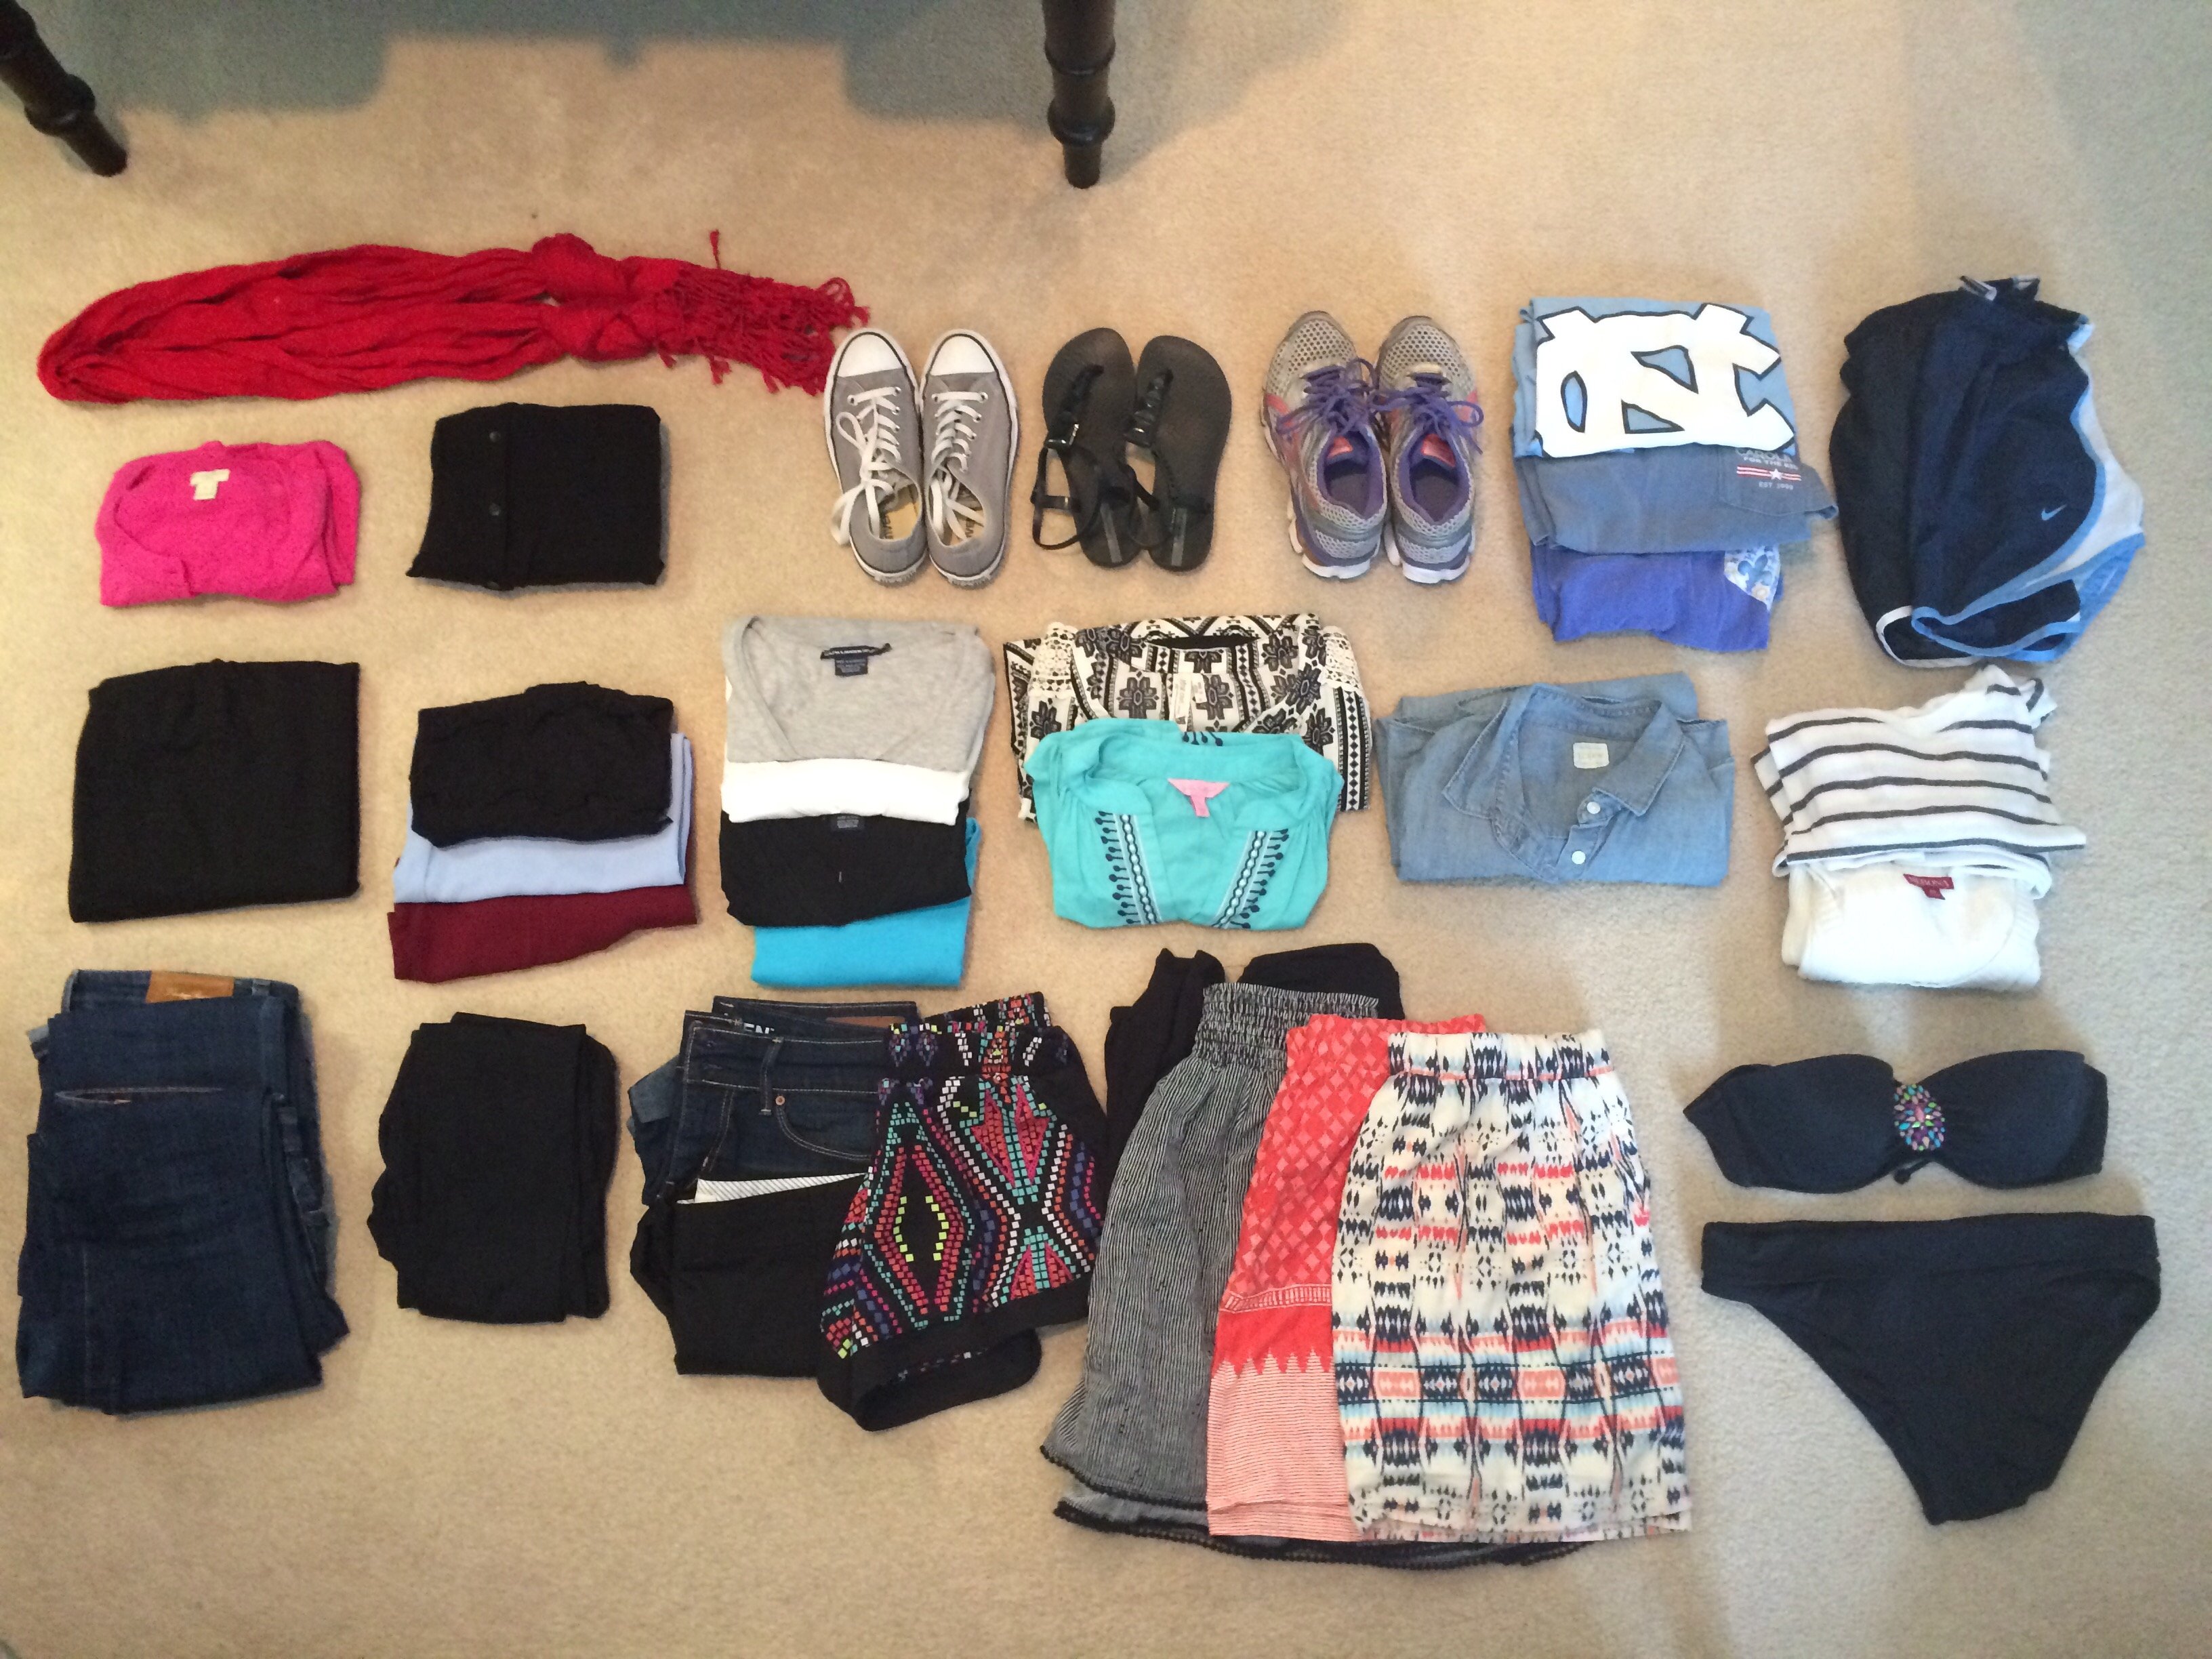 All of the clothes and accessories that I'm bringing with me